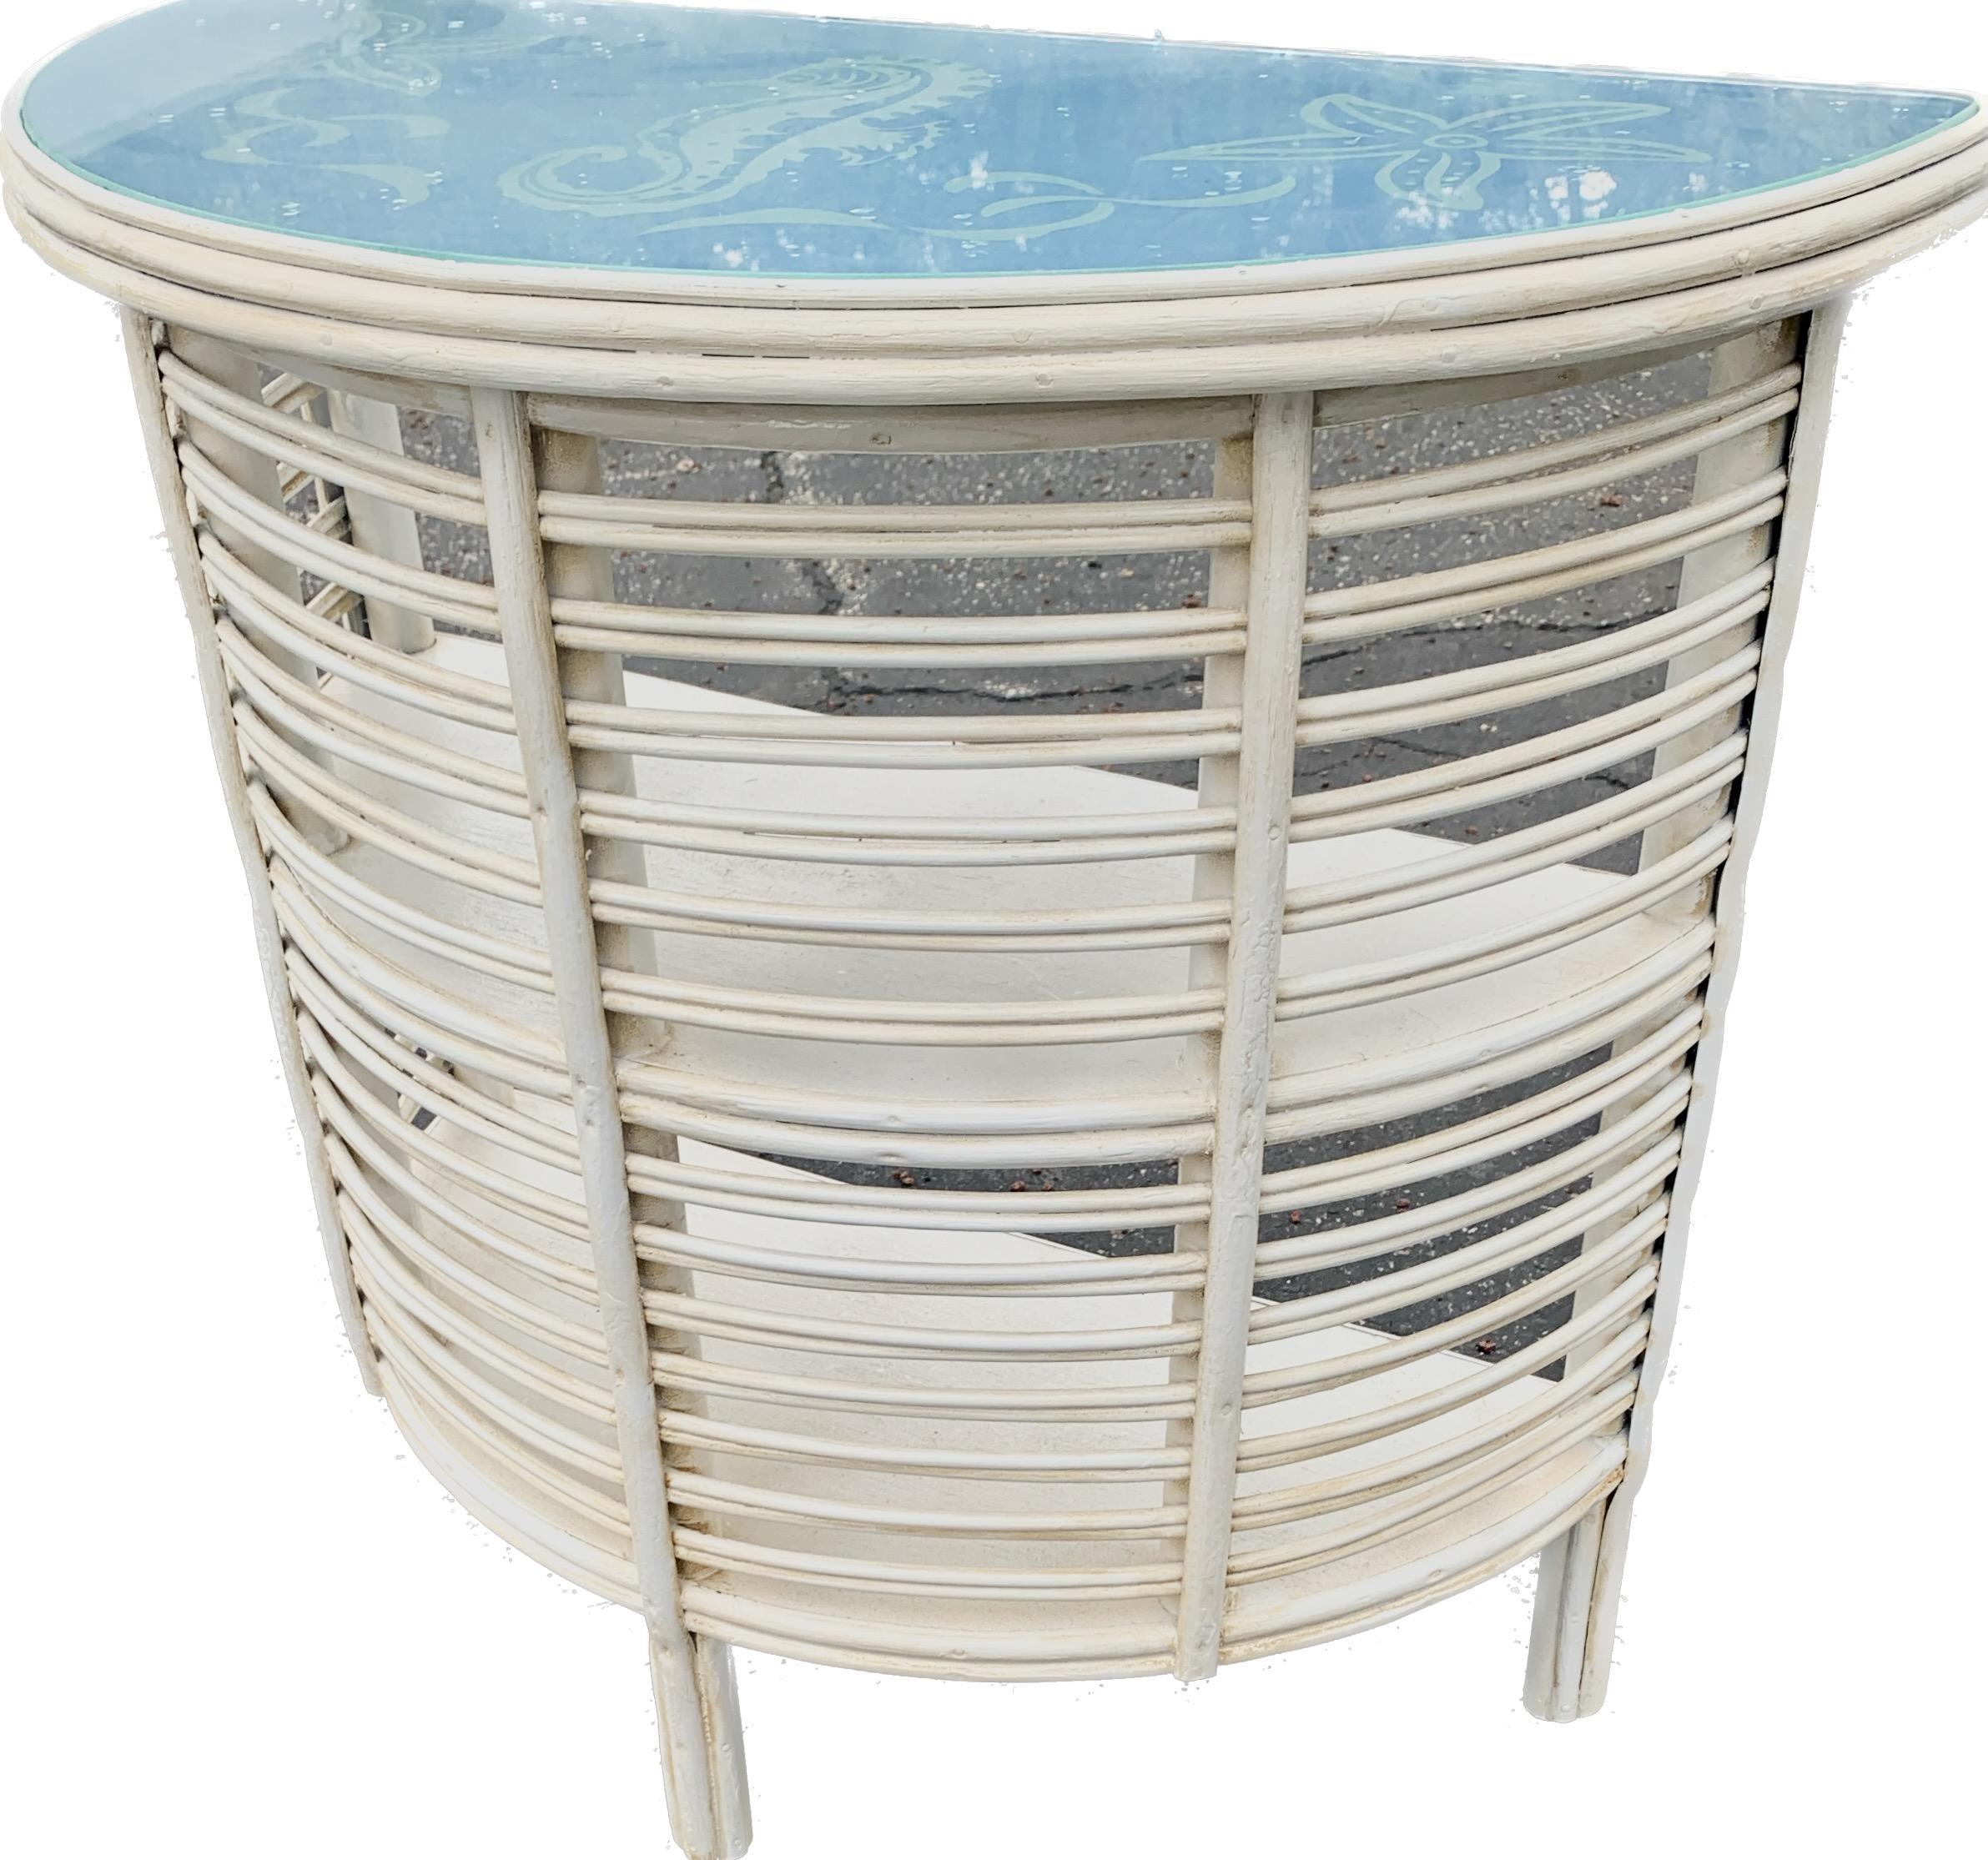 A rare pair of Art Deco Rattan Demi Lune side tables attributed to the Heywood Wakefield Company, Gardner, Ma., American, C. 1929,
The tables are done in a white painted finish and are in very good condition.These rattan tables are also referred to